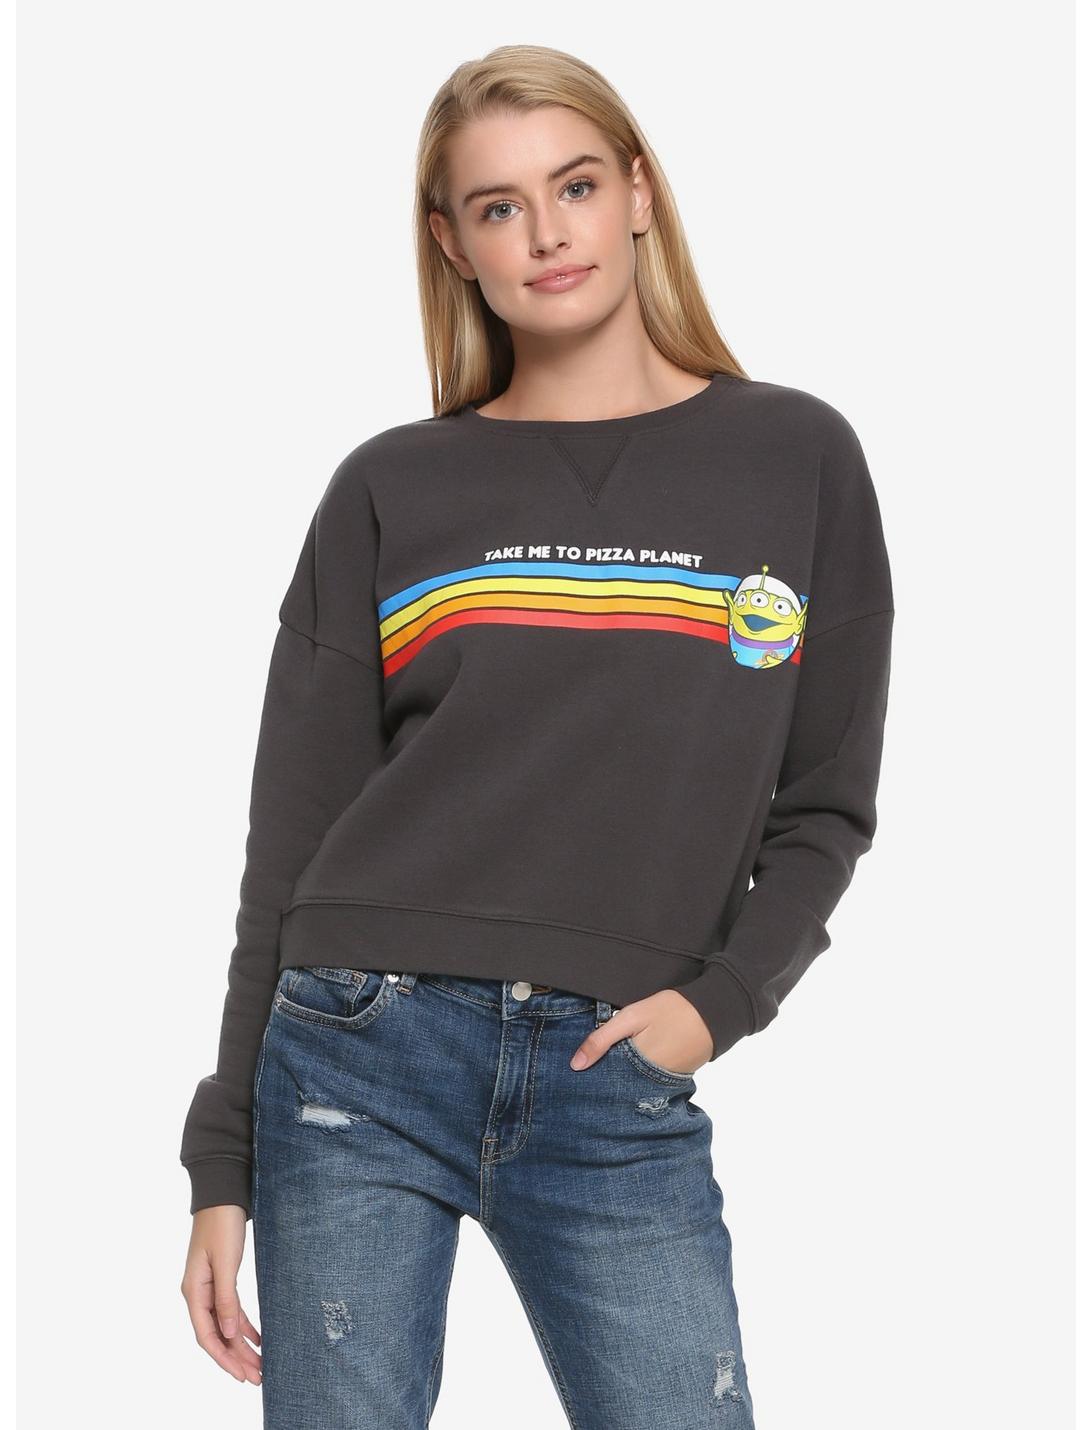 Disney Pixar Toy Story Pizza Planet Womens Skimmer Sweatershirt - BoxLunch Exclusive, GREY, hi-res